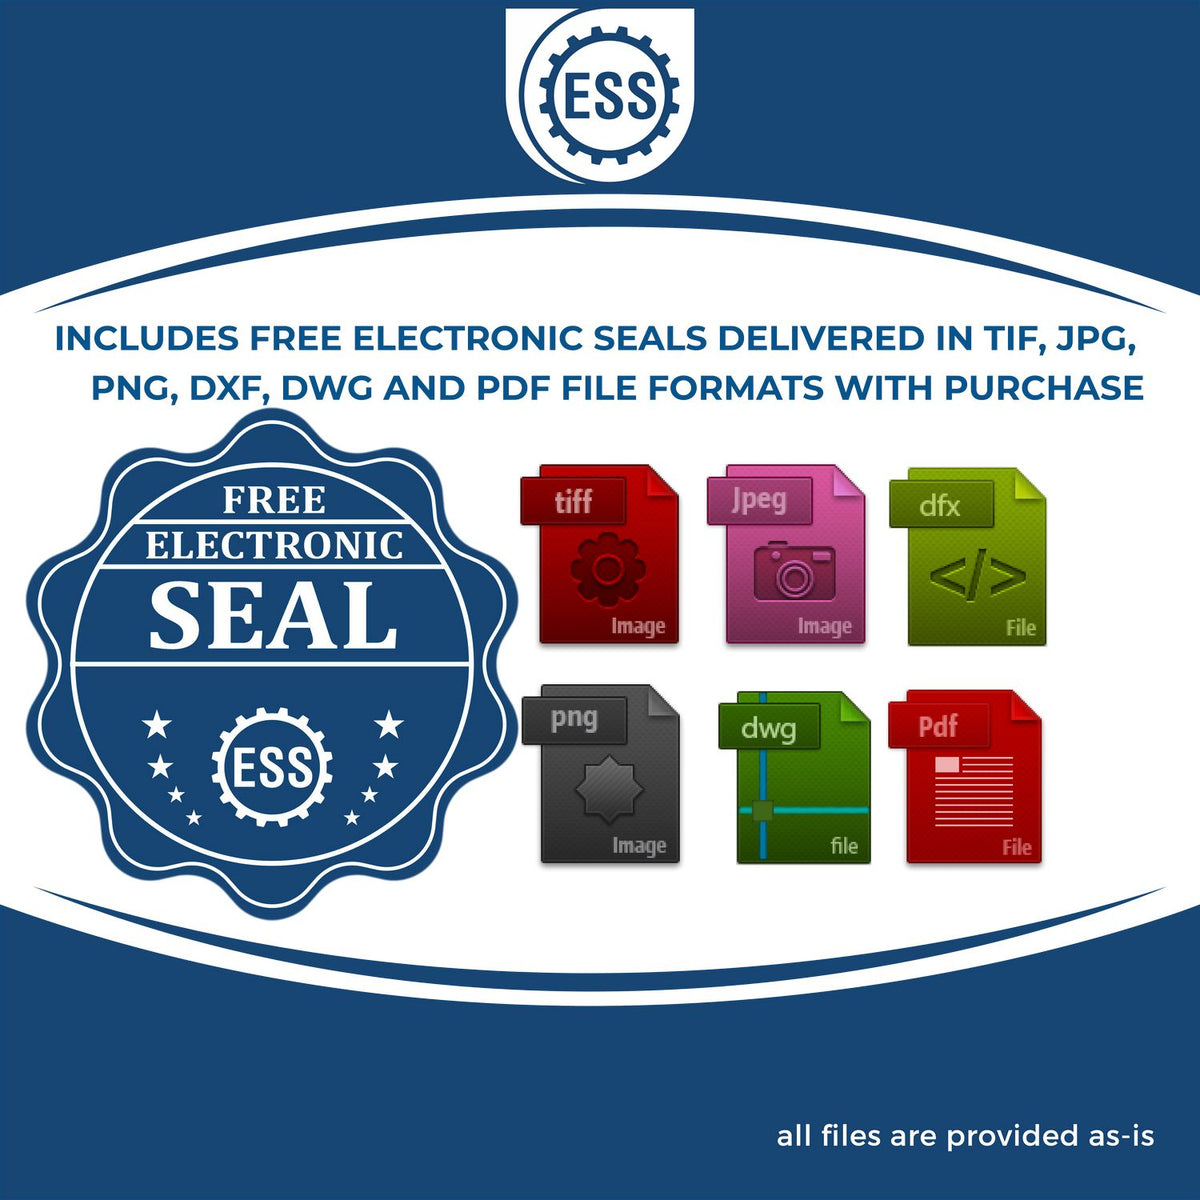 An infographic for the free electronic seal for the Pennsylvania Desk Architect Embossing Seal illustrating the different file type icons such as DXF, DWG, TIF, JPG and PNG.